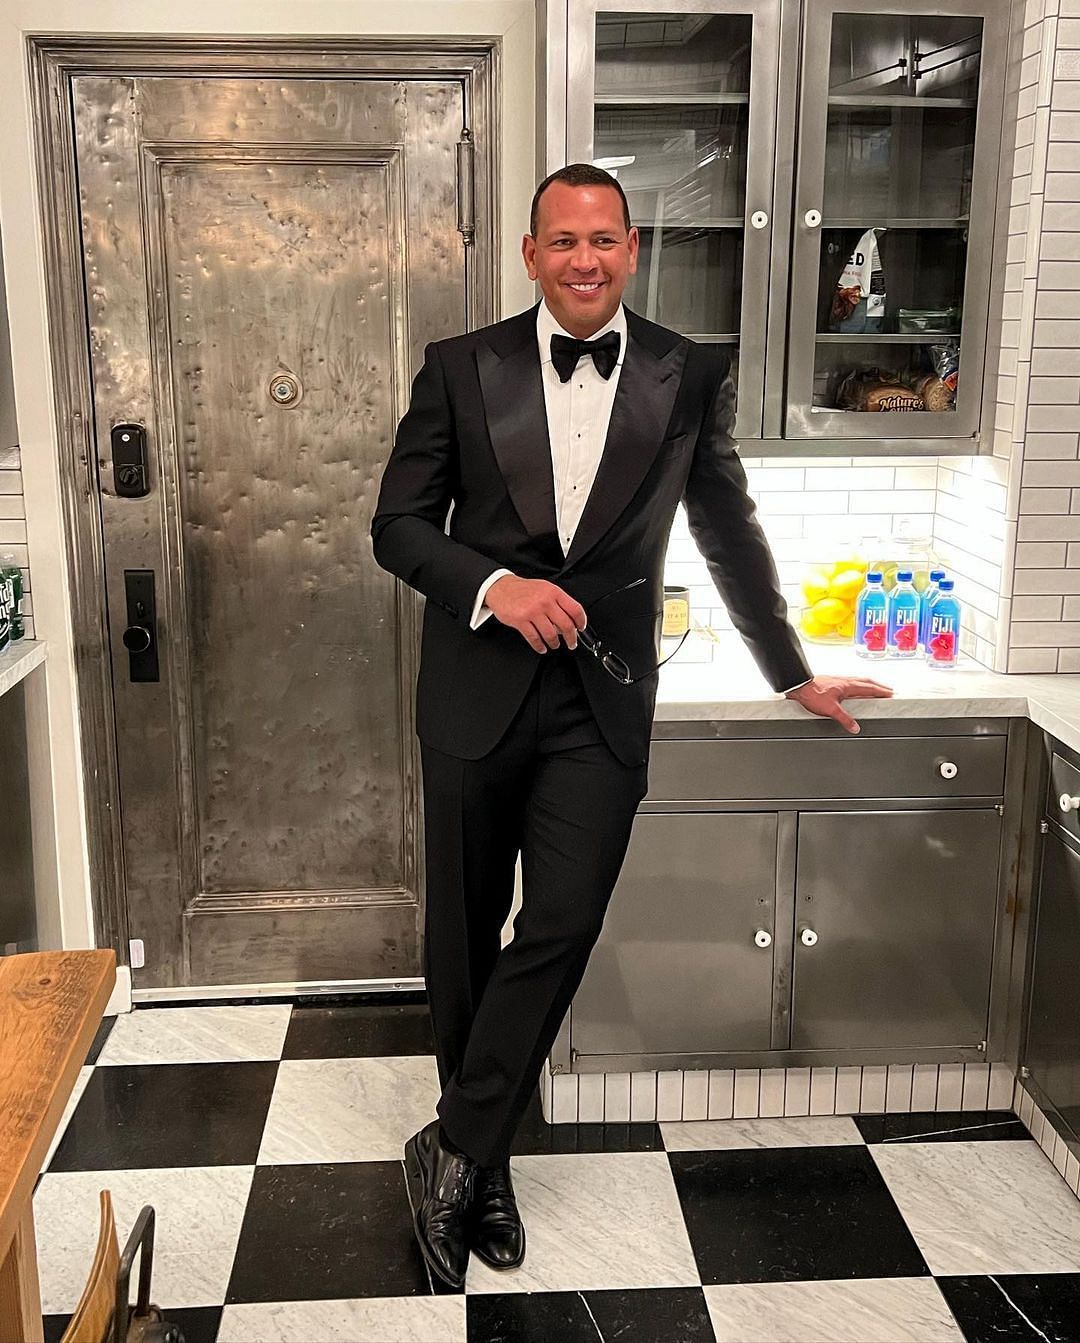 Alex Rodriguez enjoys varying his exercises and training to make sure every part of his body receives regular conditioning. (Image via Instagram)